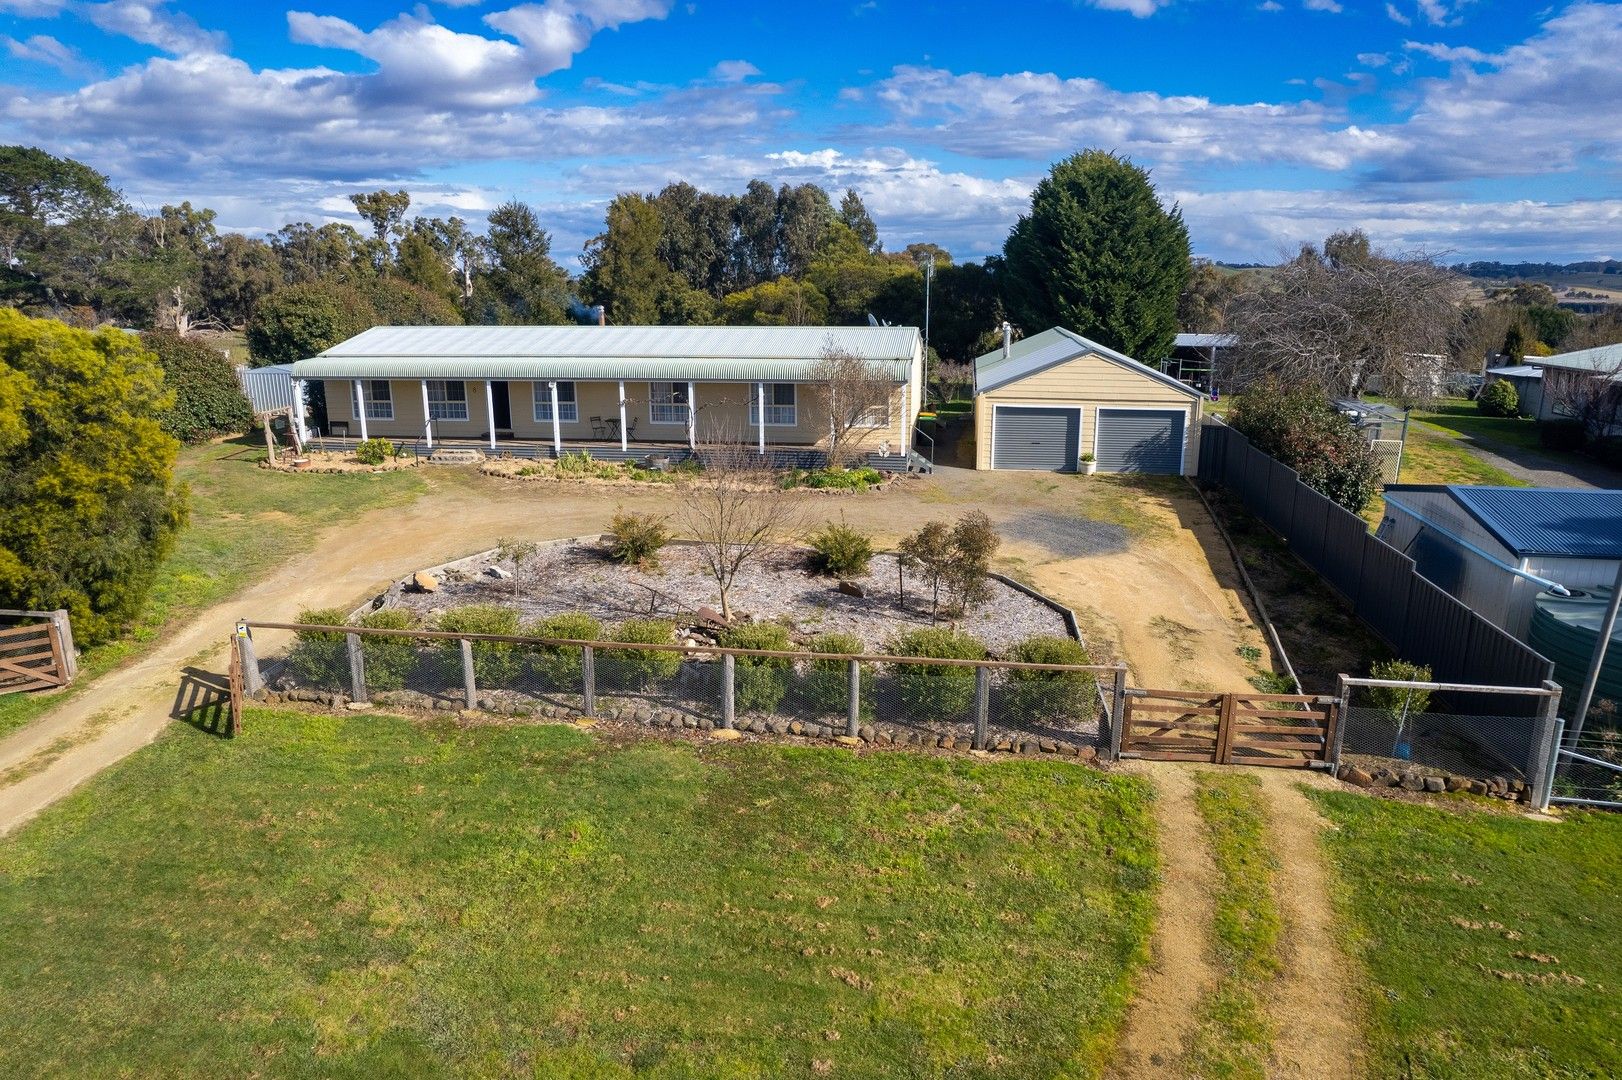 4 bedrooms House in 8 Caledonia CROOKWELL NSW, 2583